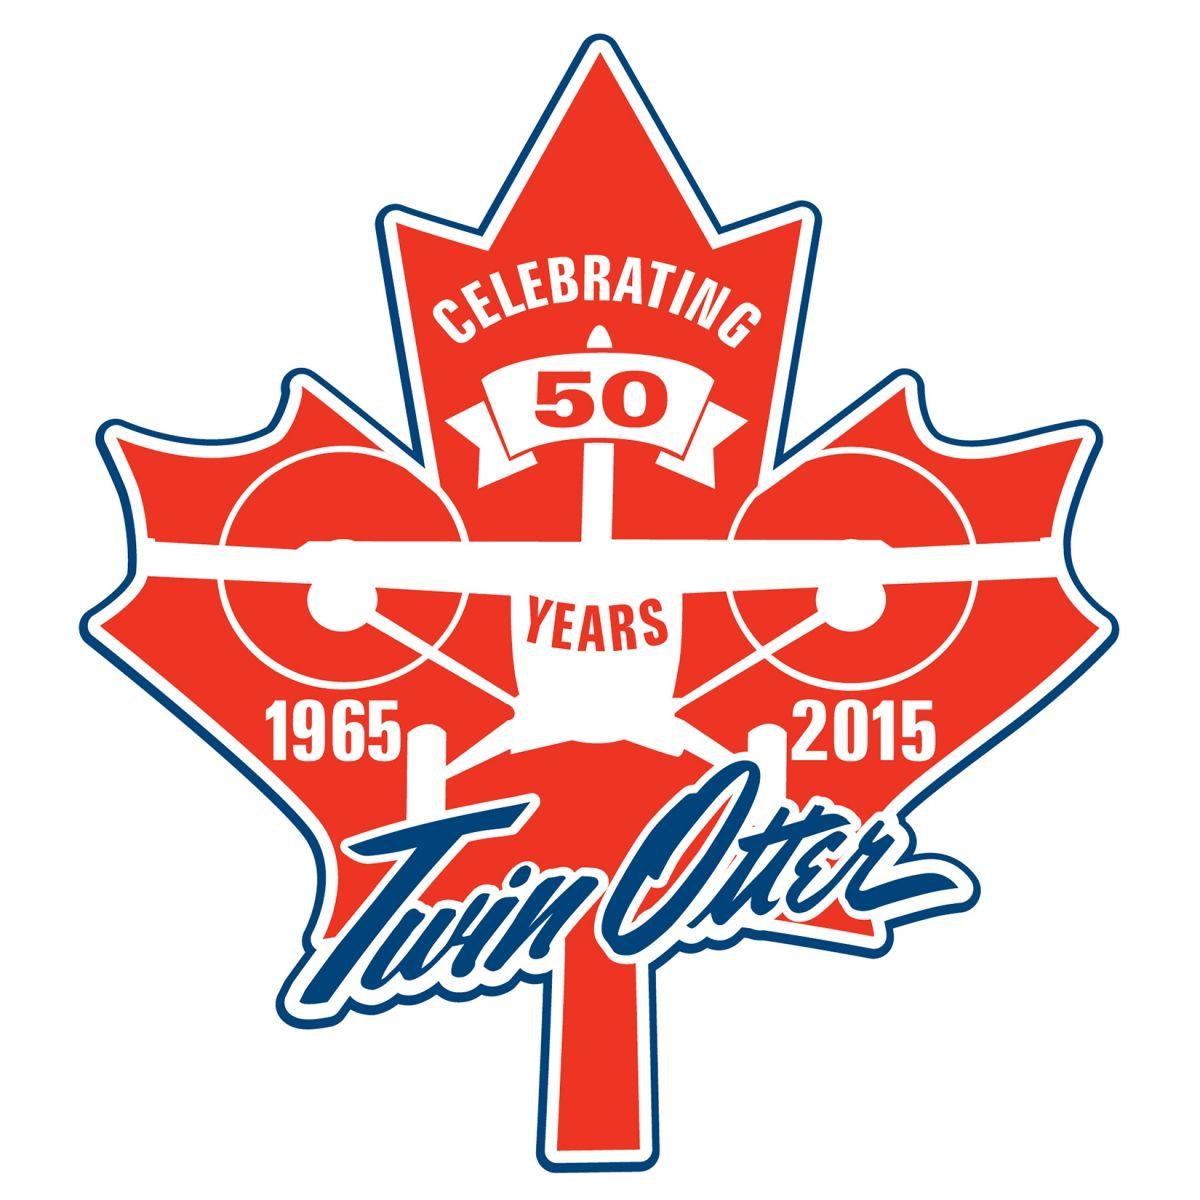 Aircraft Anniversary Logo - 50th Anniversary Celebration Tour Honours the Legendary Twin Otter ...